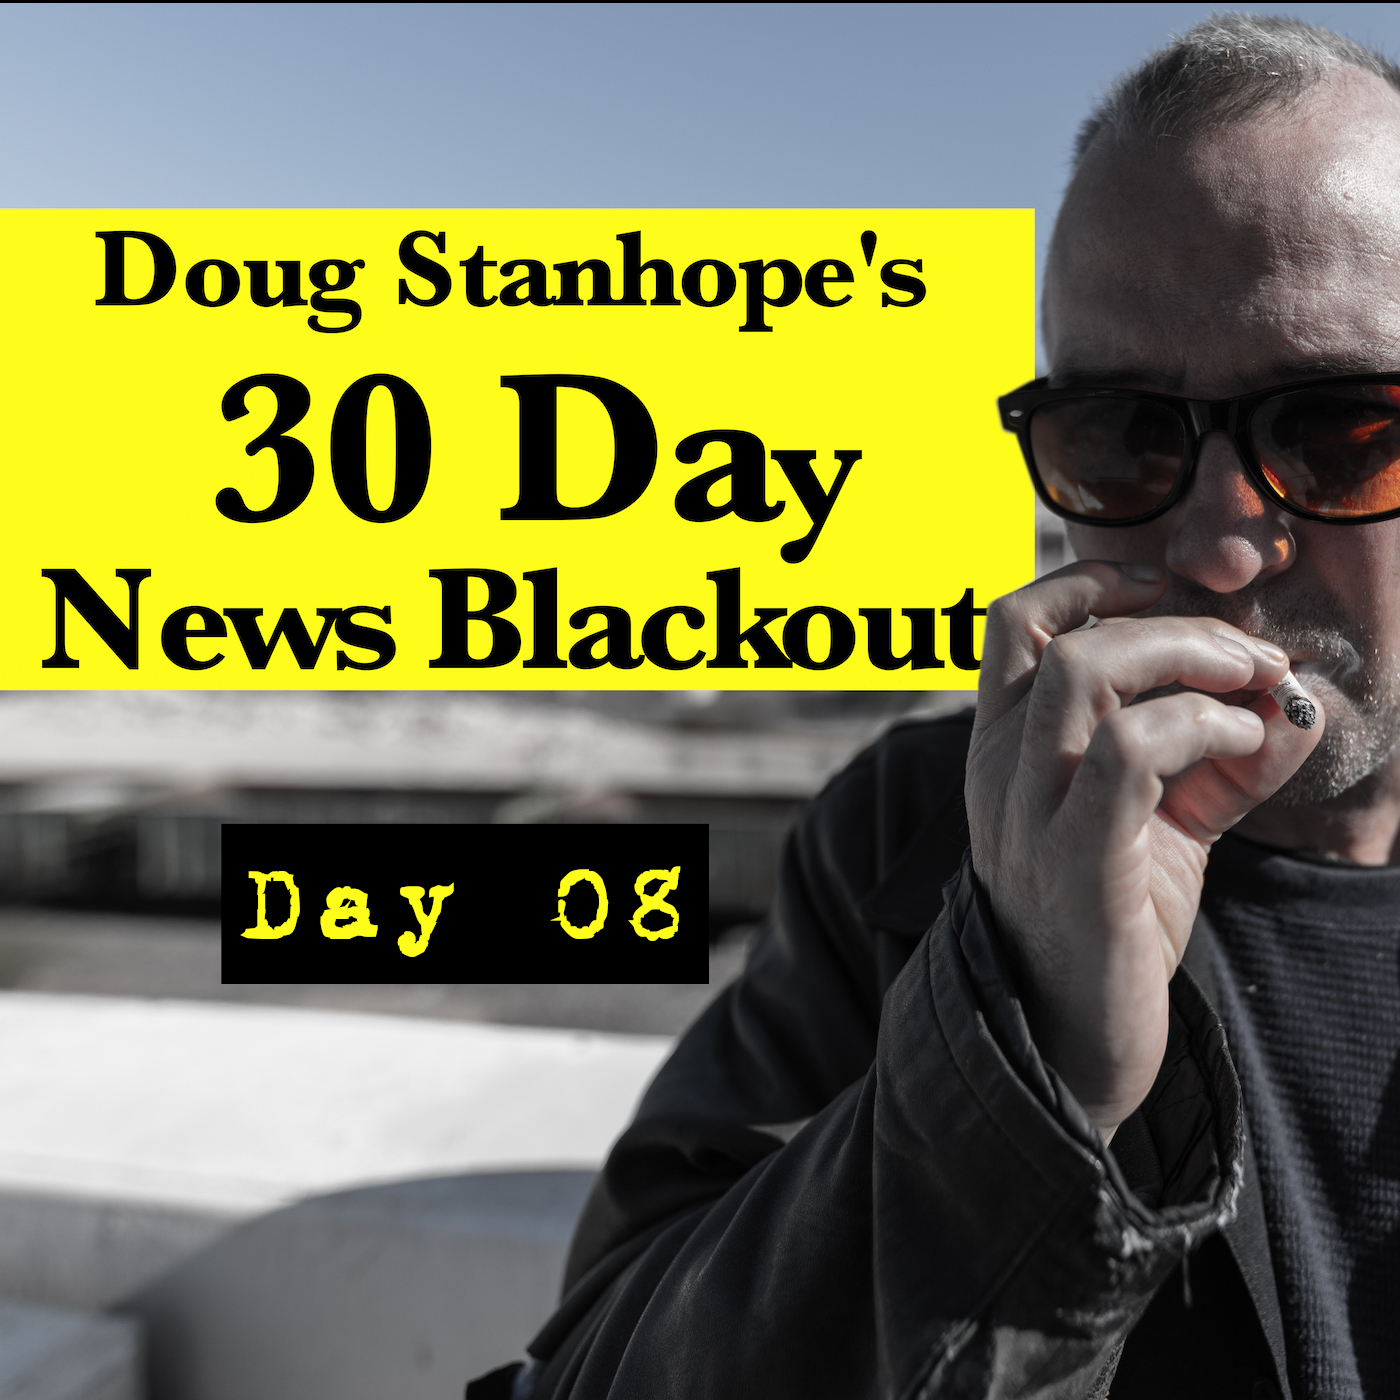 Ep.#372: Day 08 - Stanhope's 30 Day News Blackout